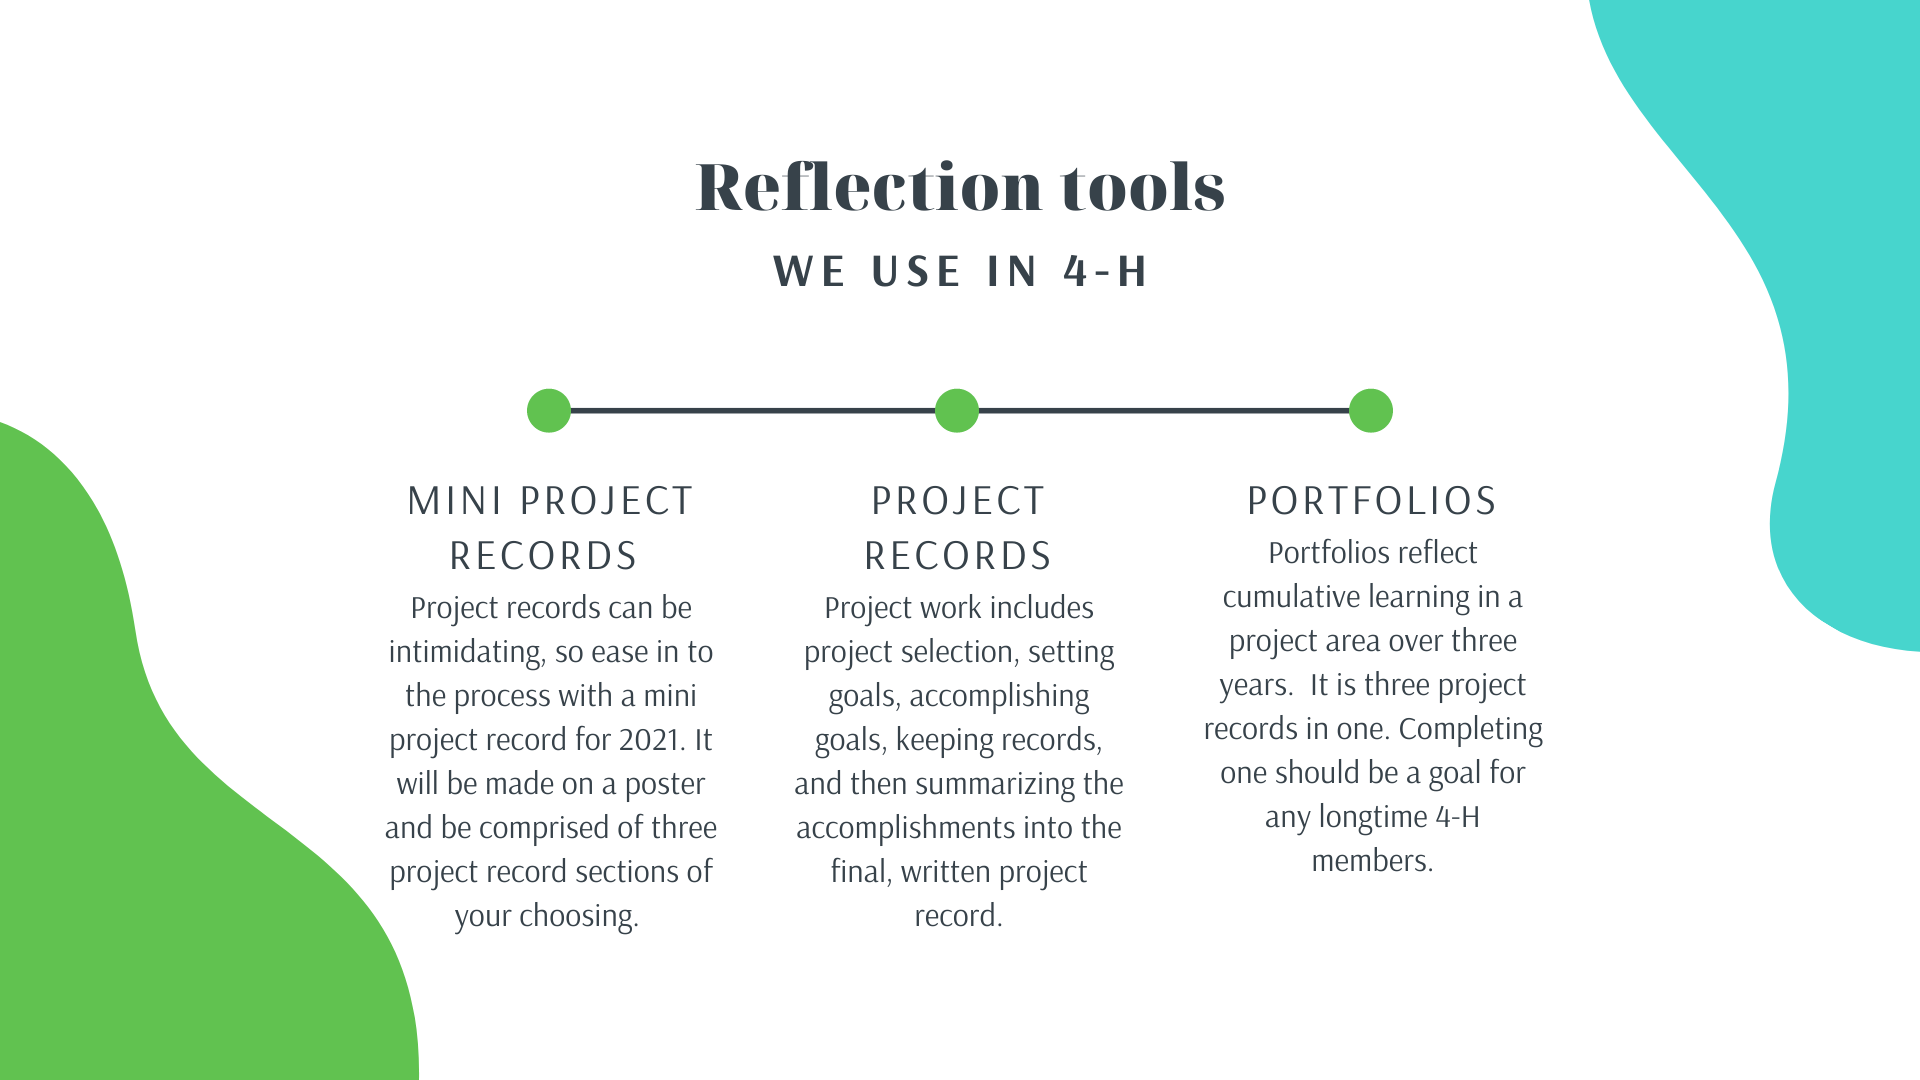 Mini Project Records, Project Records and Portfolios are three of the reflection tools we use in 4-H. 